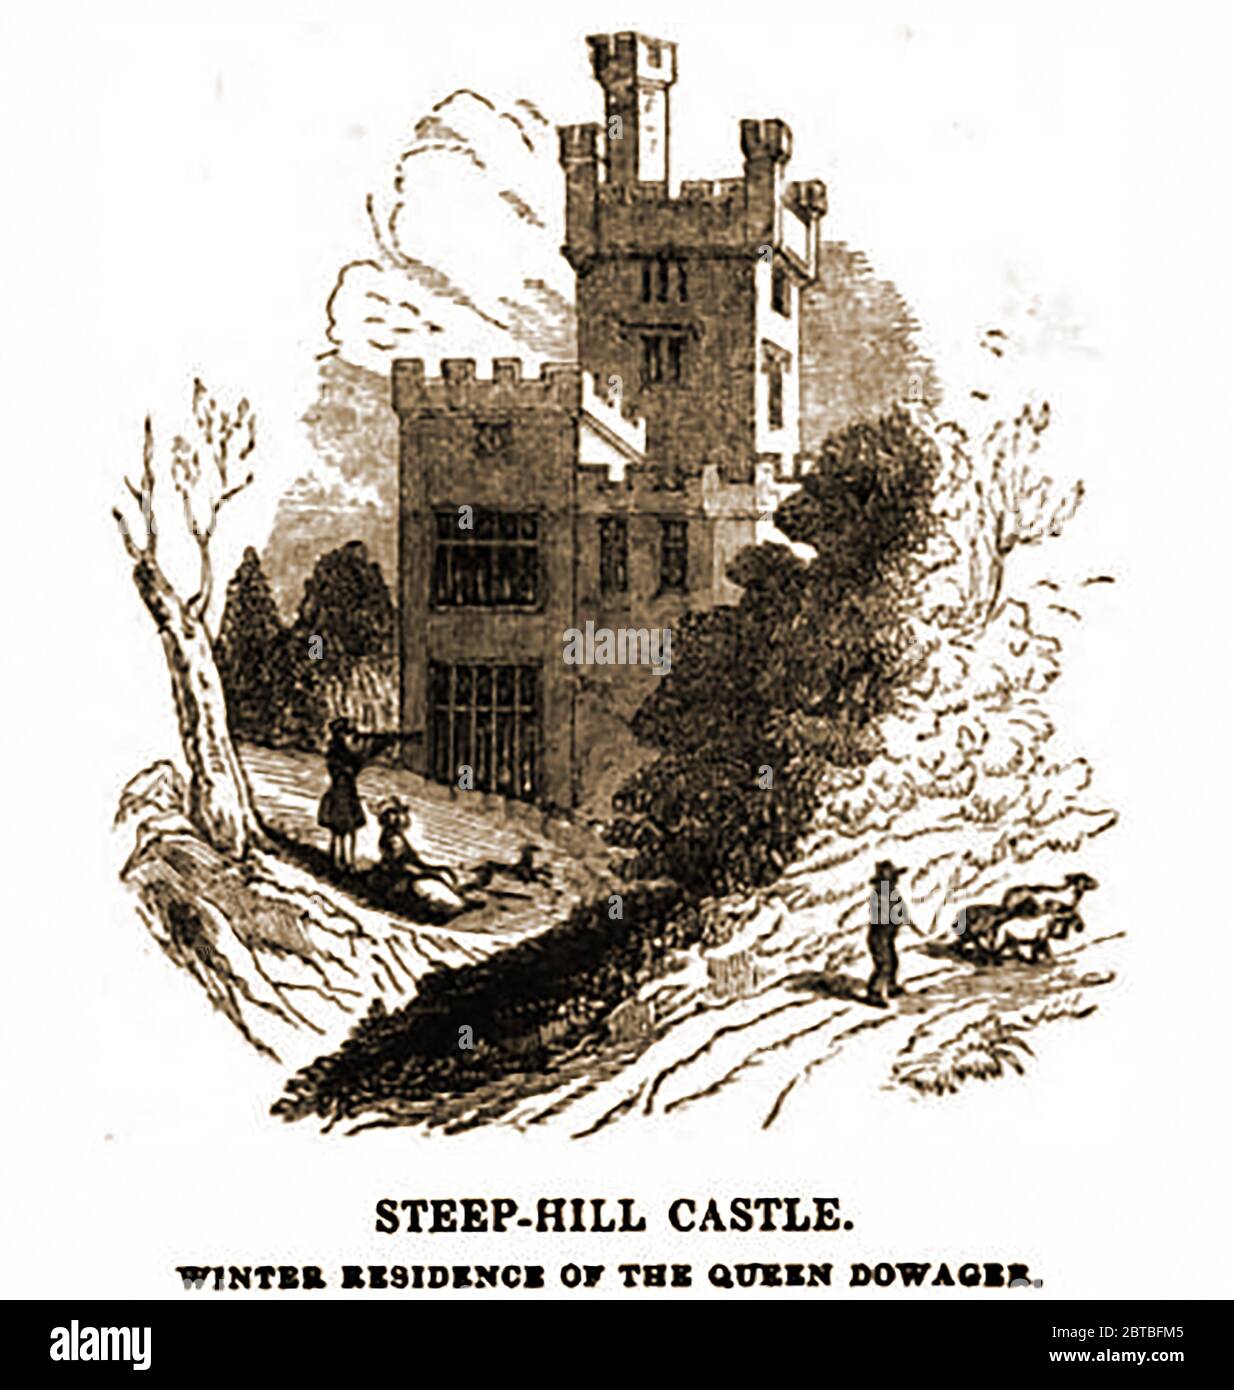 Steep hill castle before it became a ruin and was demolished  (1842). Steephill is a hamlet near Ventnor, Isle of Wight ,and the location of a former Victorian country estate with a castle-like mansion that was demolished to build modern  bungalows in the 1960's. Building of the Castle, which took two years to complete started in 1833. When demolished it was found that many of the carvings in the castle were in fact castings and that the oak used in its construction was in fact disguised deal. Some have considered the castle as a folly. Stock Photo